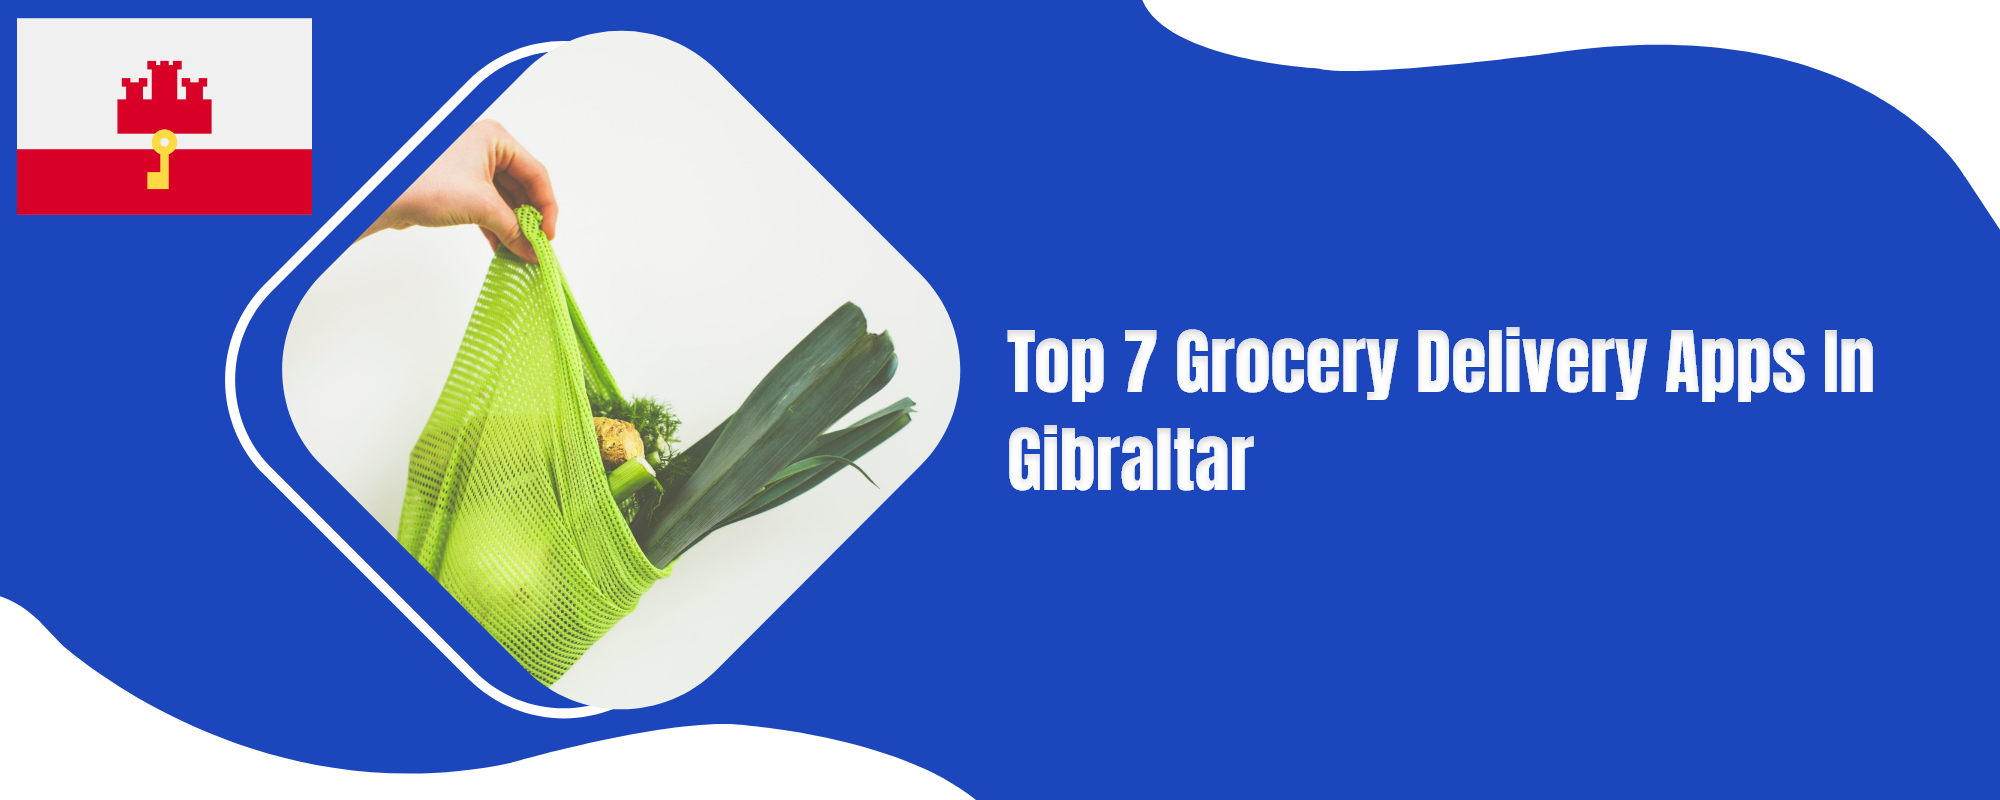 Grocery delivery apps in Gibraltar